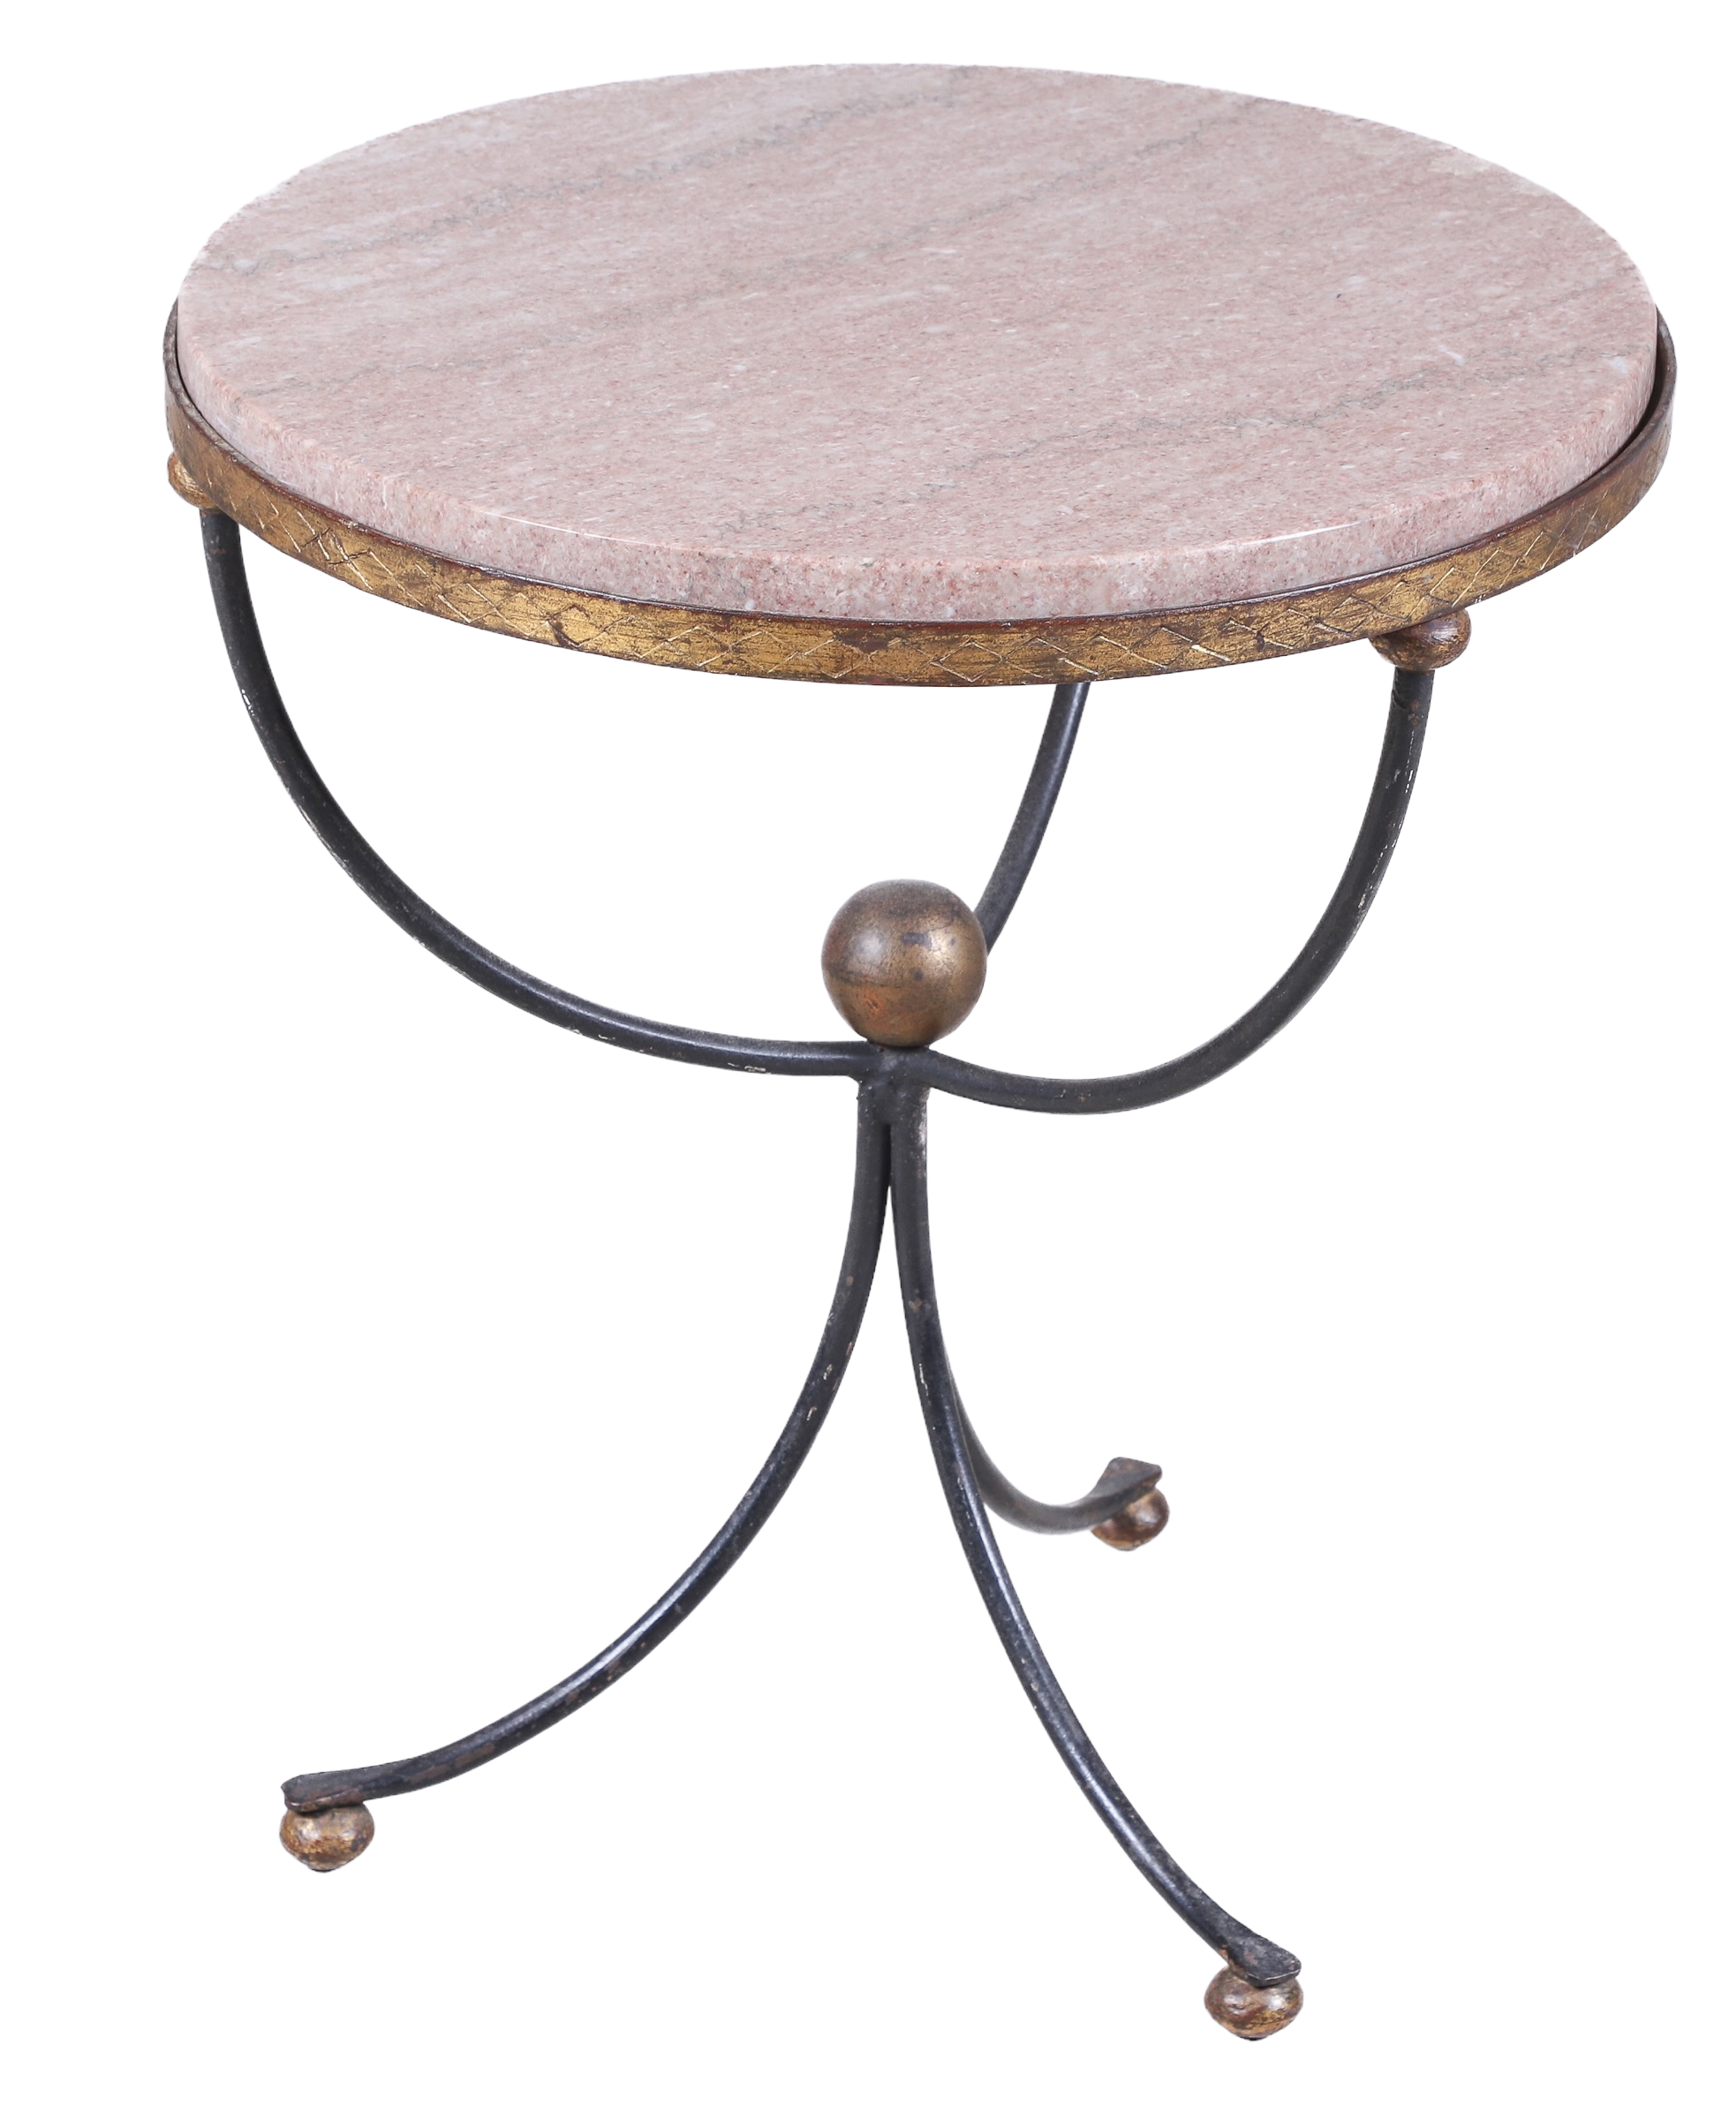 Iron and gilt marbletop side table  317e44